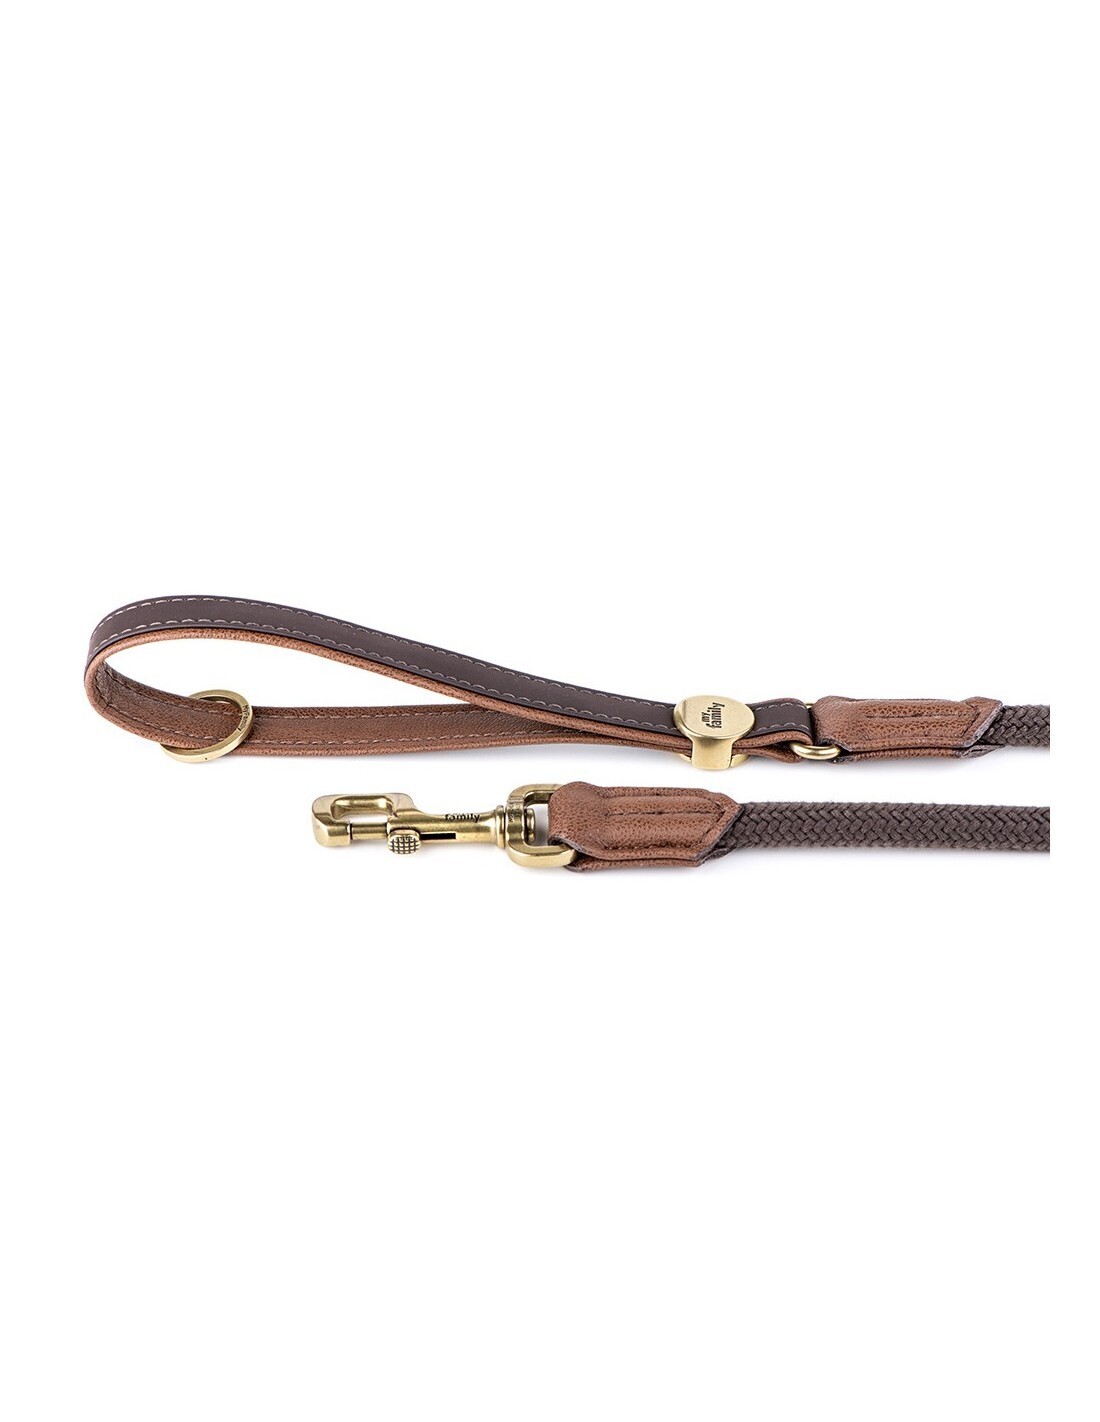 MyFamily Bilbao Dog Leash Bilbao in Fine Crafted Brown Leatherette and Rope